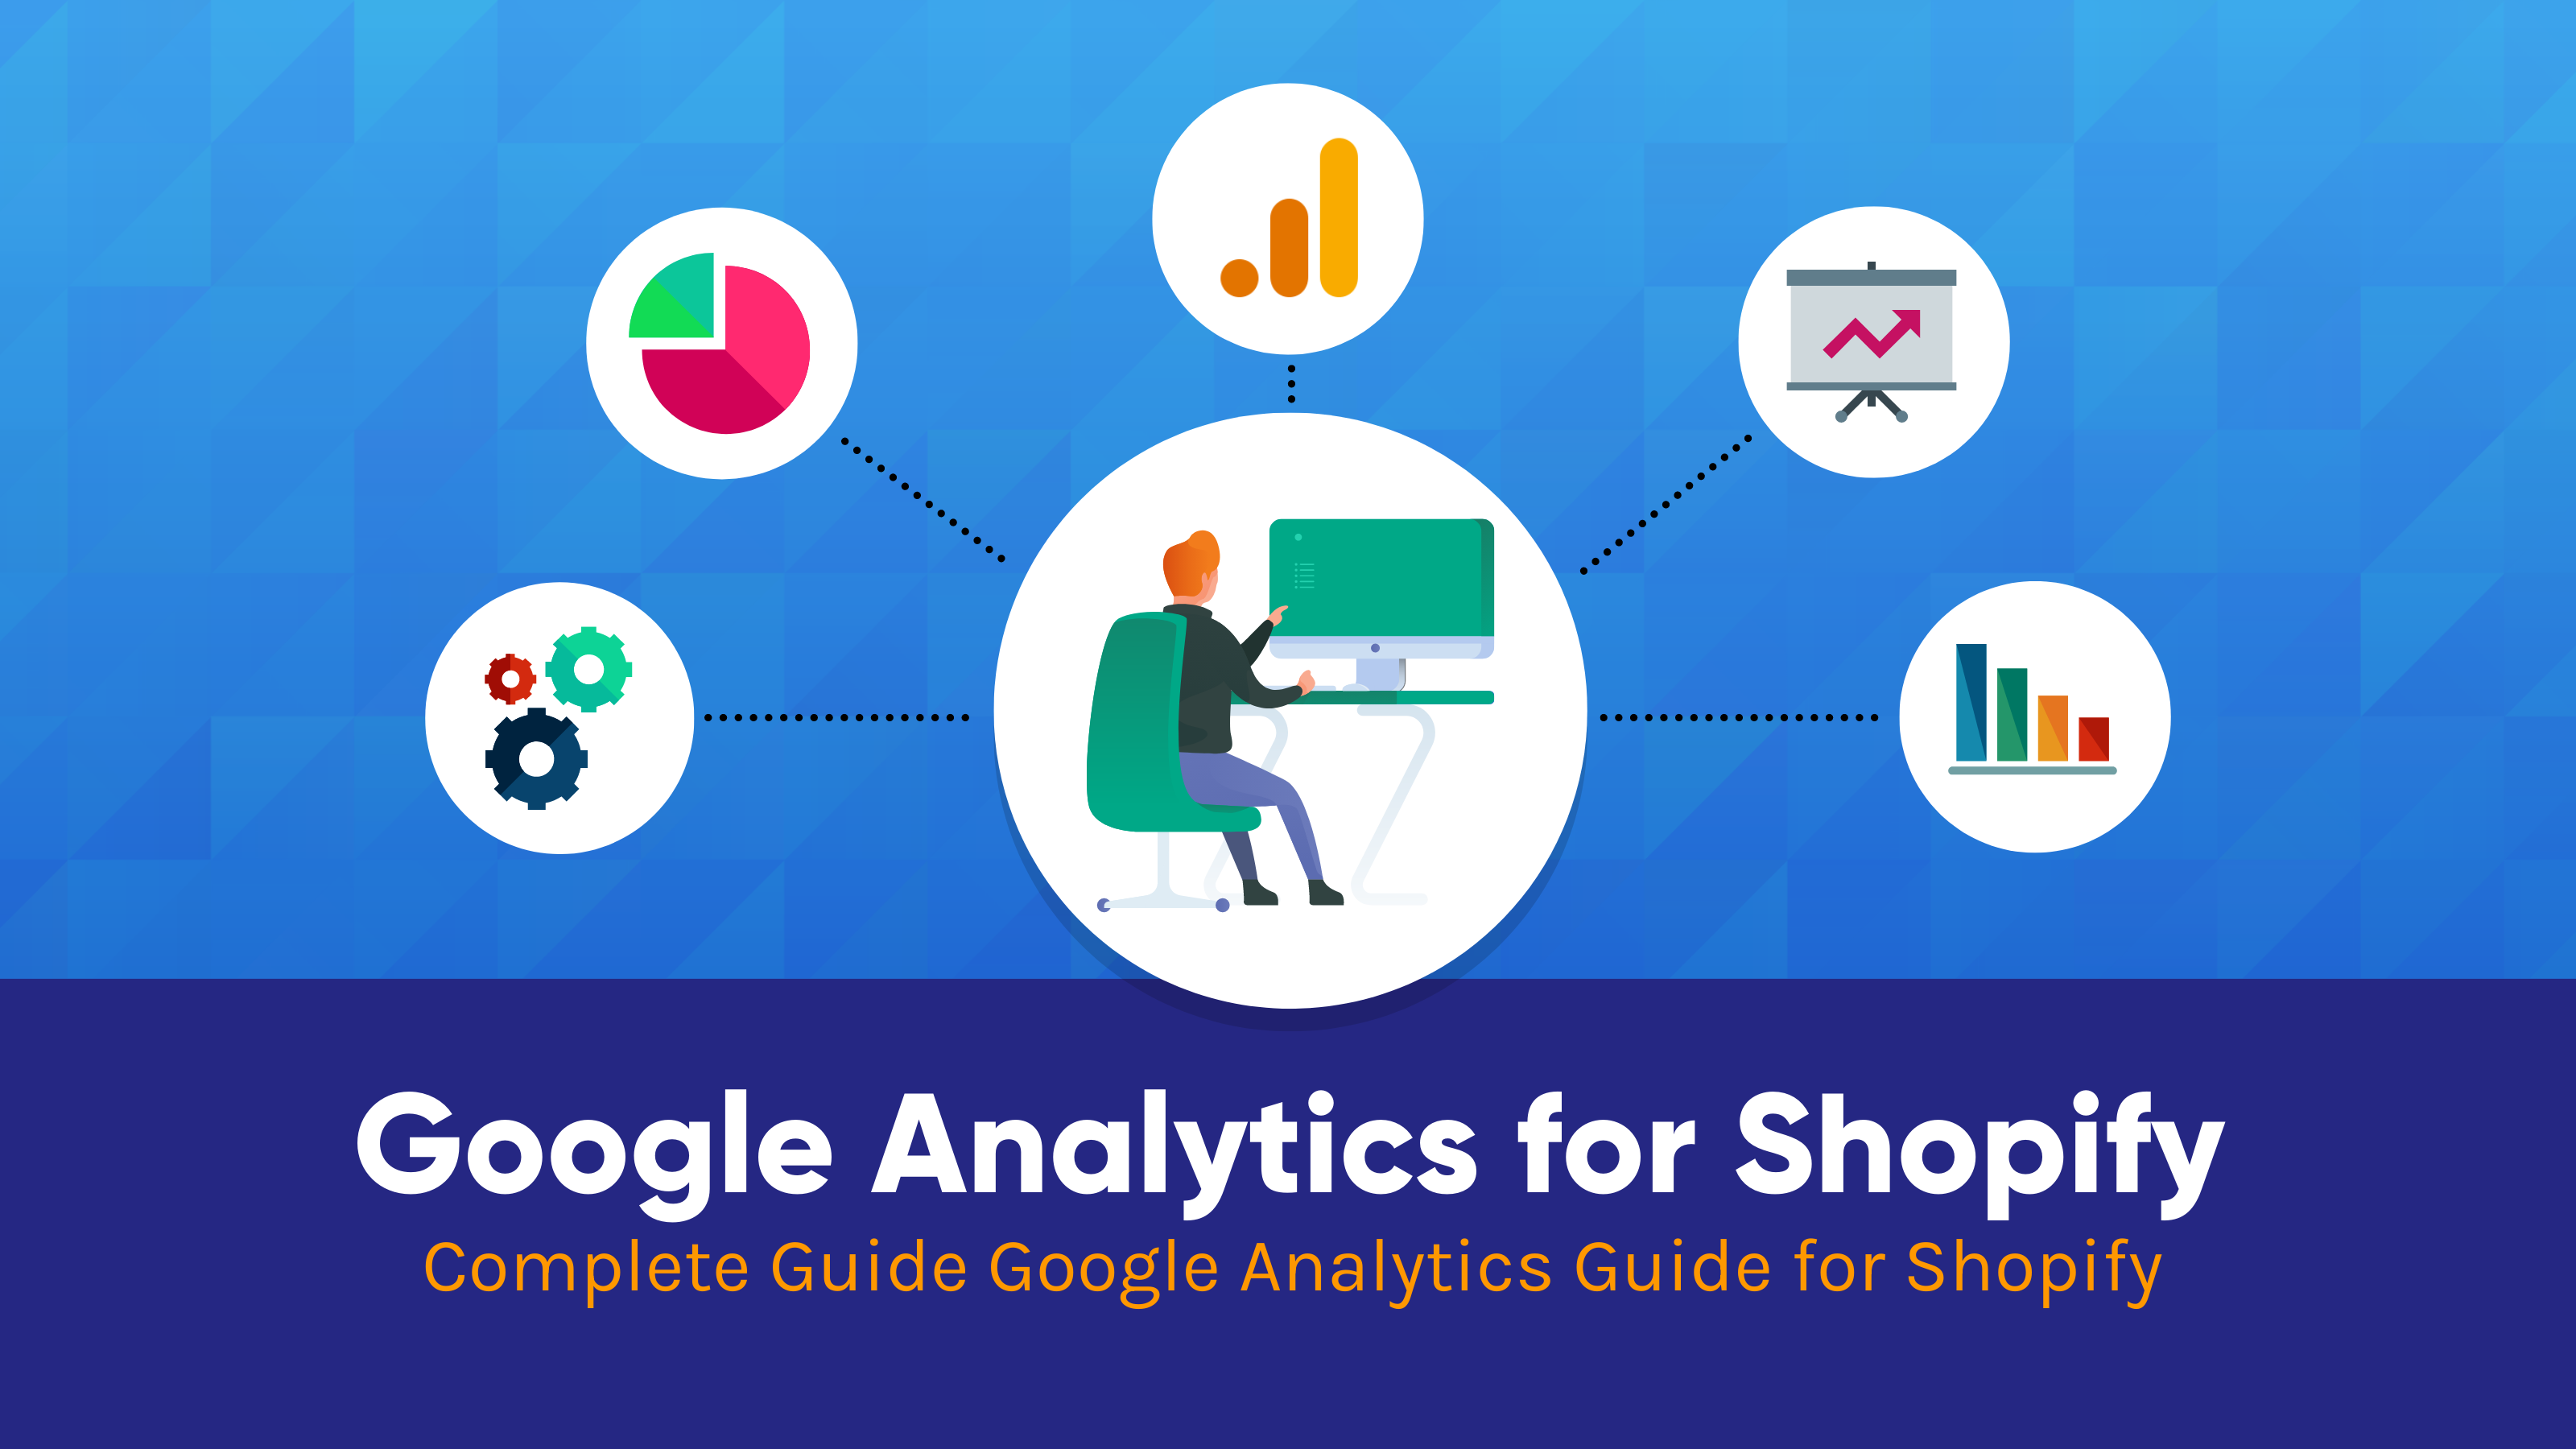 Google Analytics for Shopify: A Complete Guide